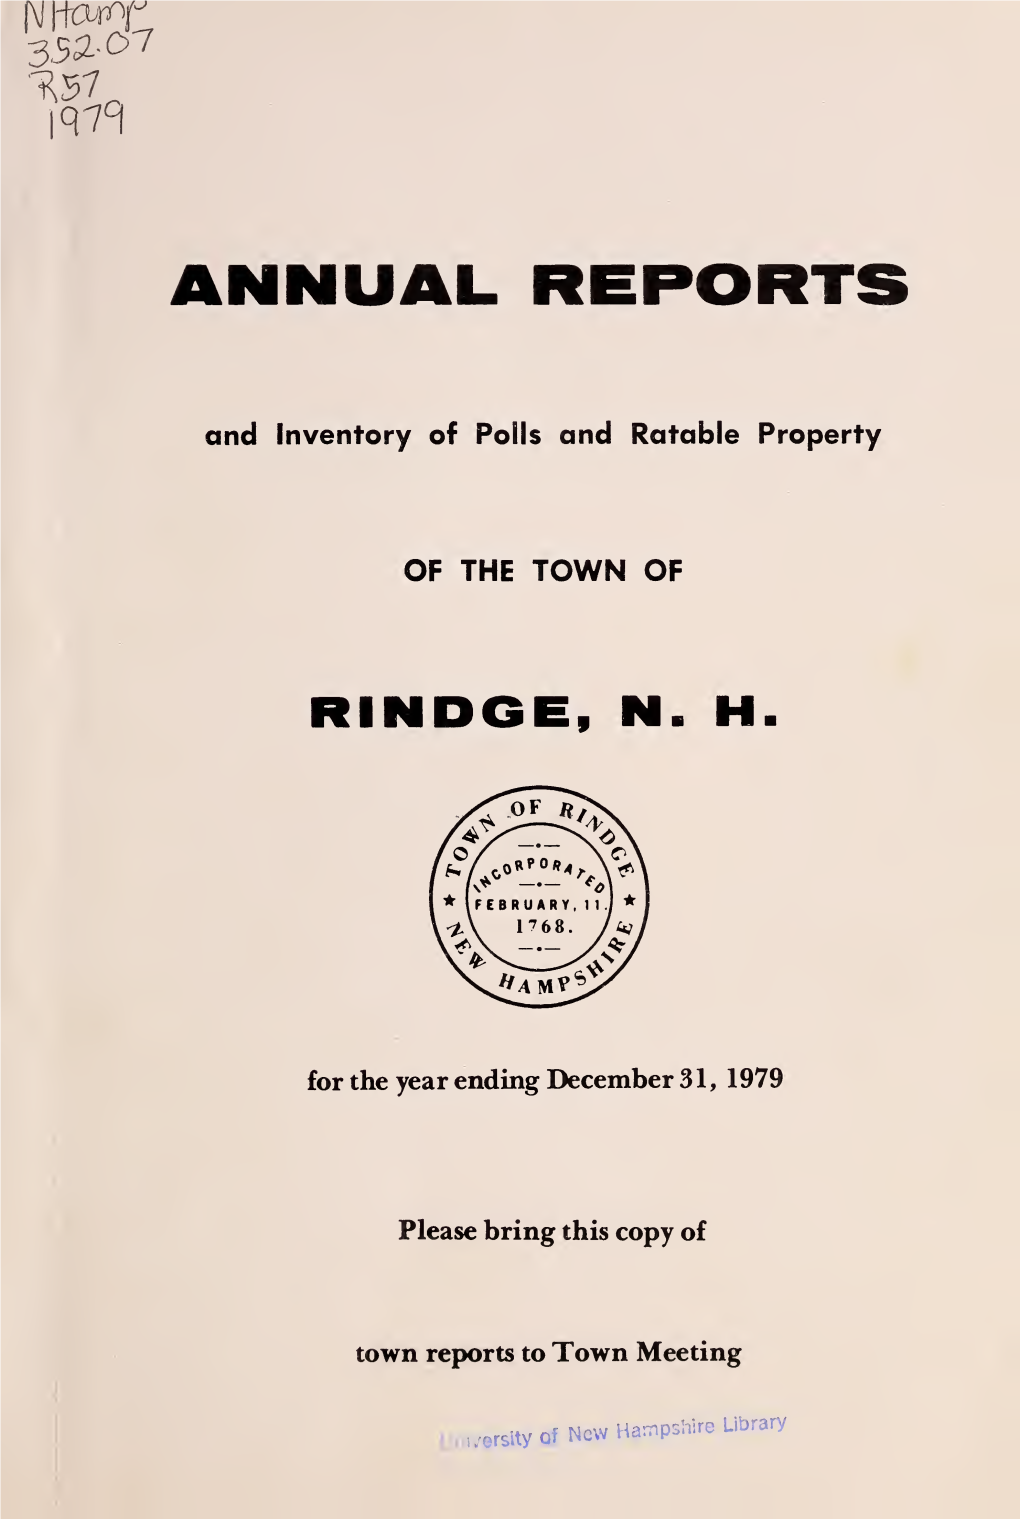 Annual Report of the Town of Rindge, New Hampshire